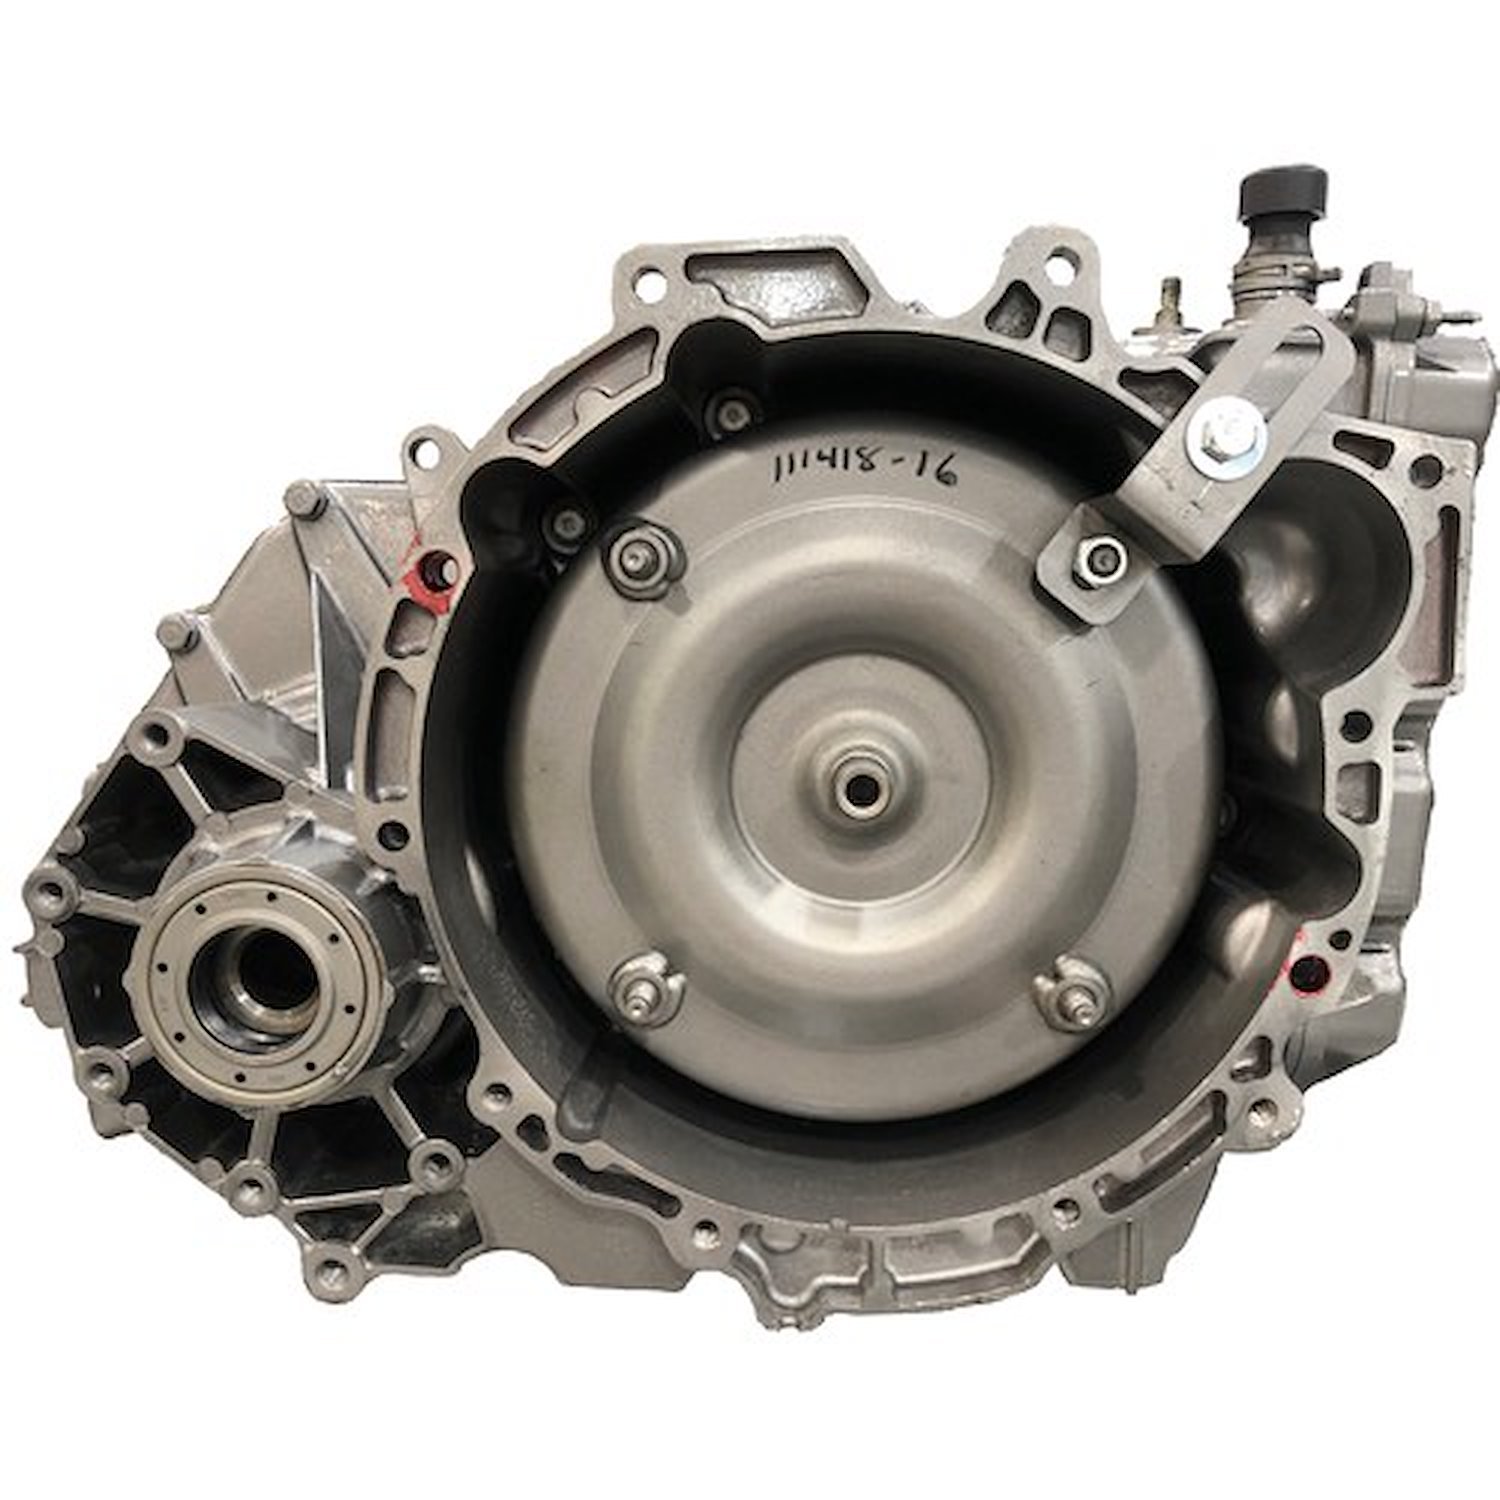 6F35 Reman Auto Trans Fits 2013-2014 Ford Fusion w/2.0L 4cyl. Eng. [FWD]